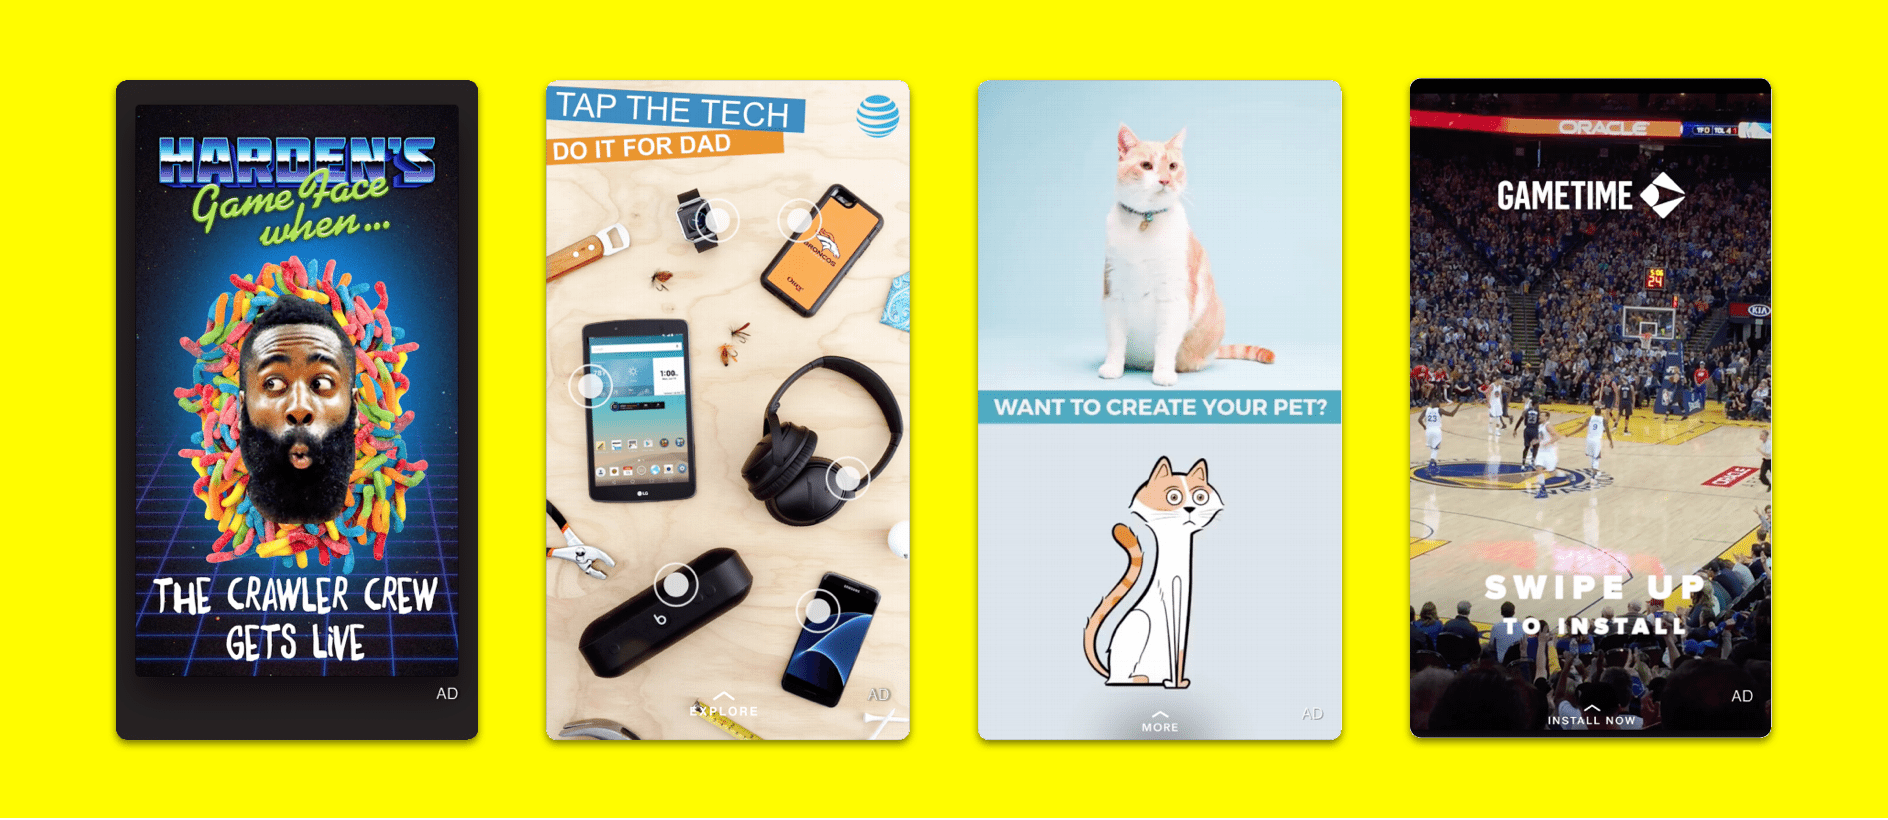 Snapchat Ad Manager Guide: How to Create Effective Snap Ads